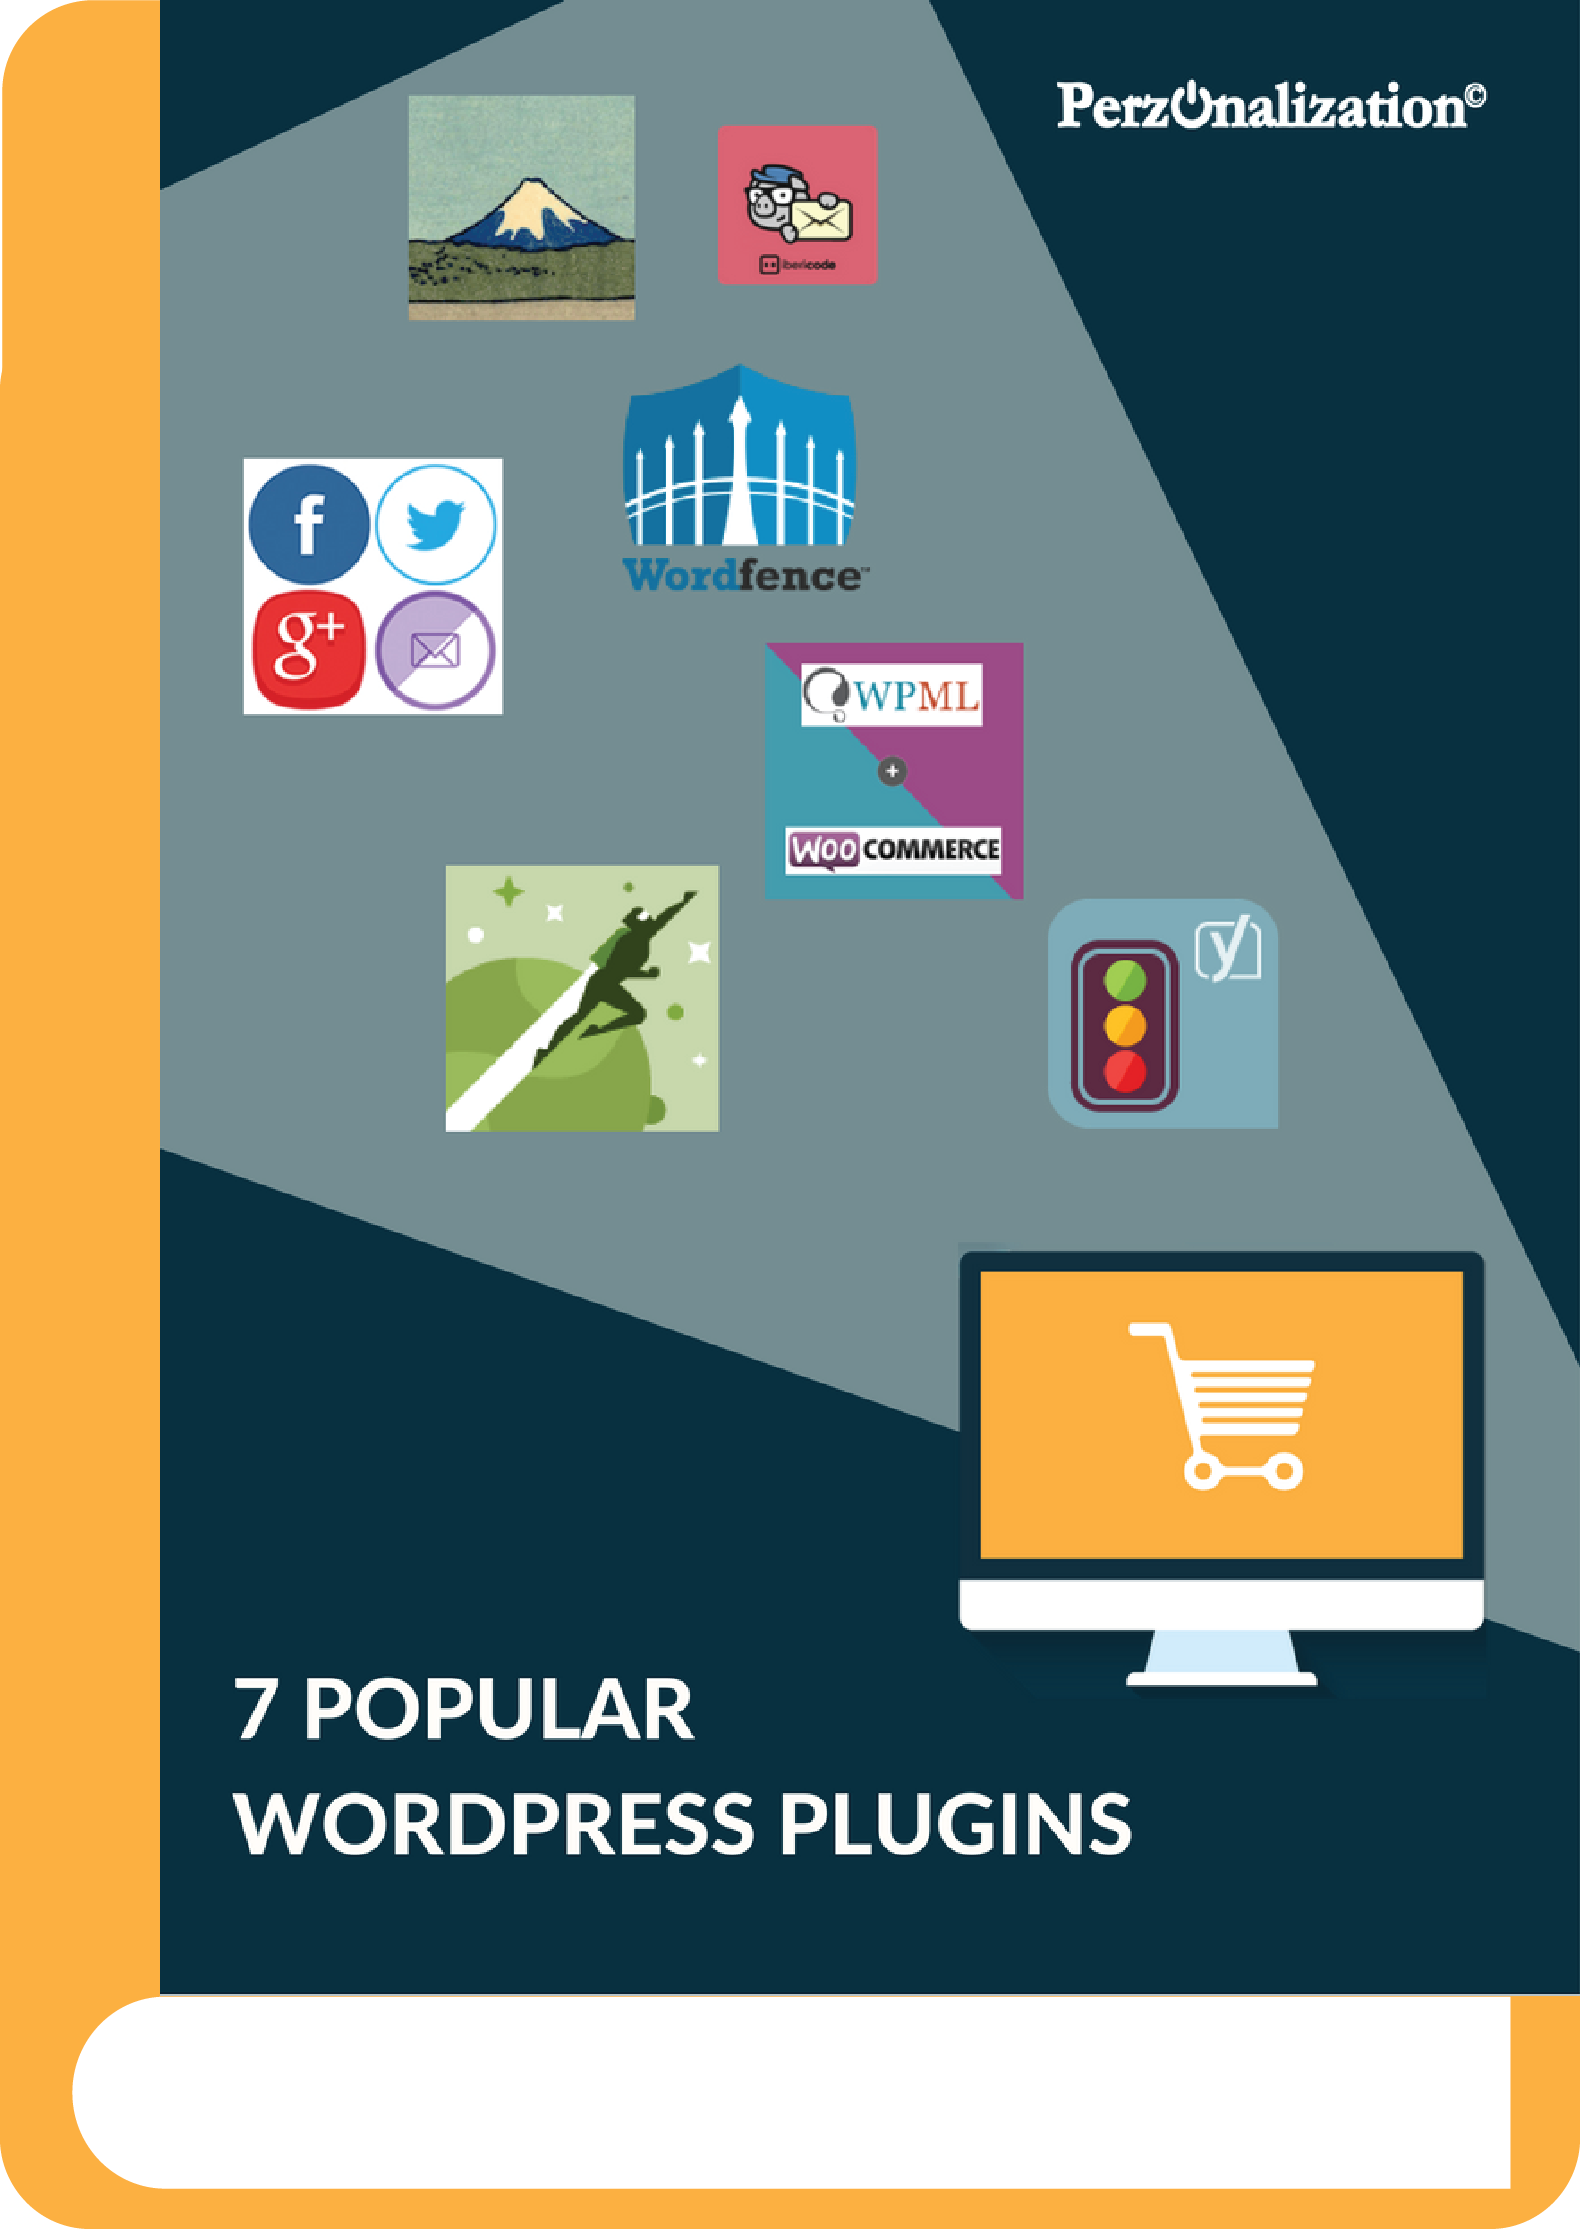 Top 7 Popular WordPress Plugins for Successful Blogging Reviews Contact Form 7, Yoast SEO, Jetpack, Wordfence Security, Mailchimp, Social Icons and WPML.